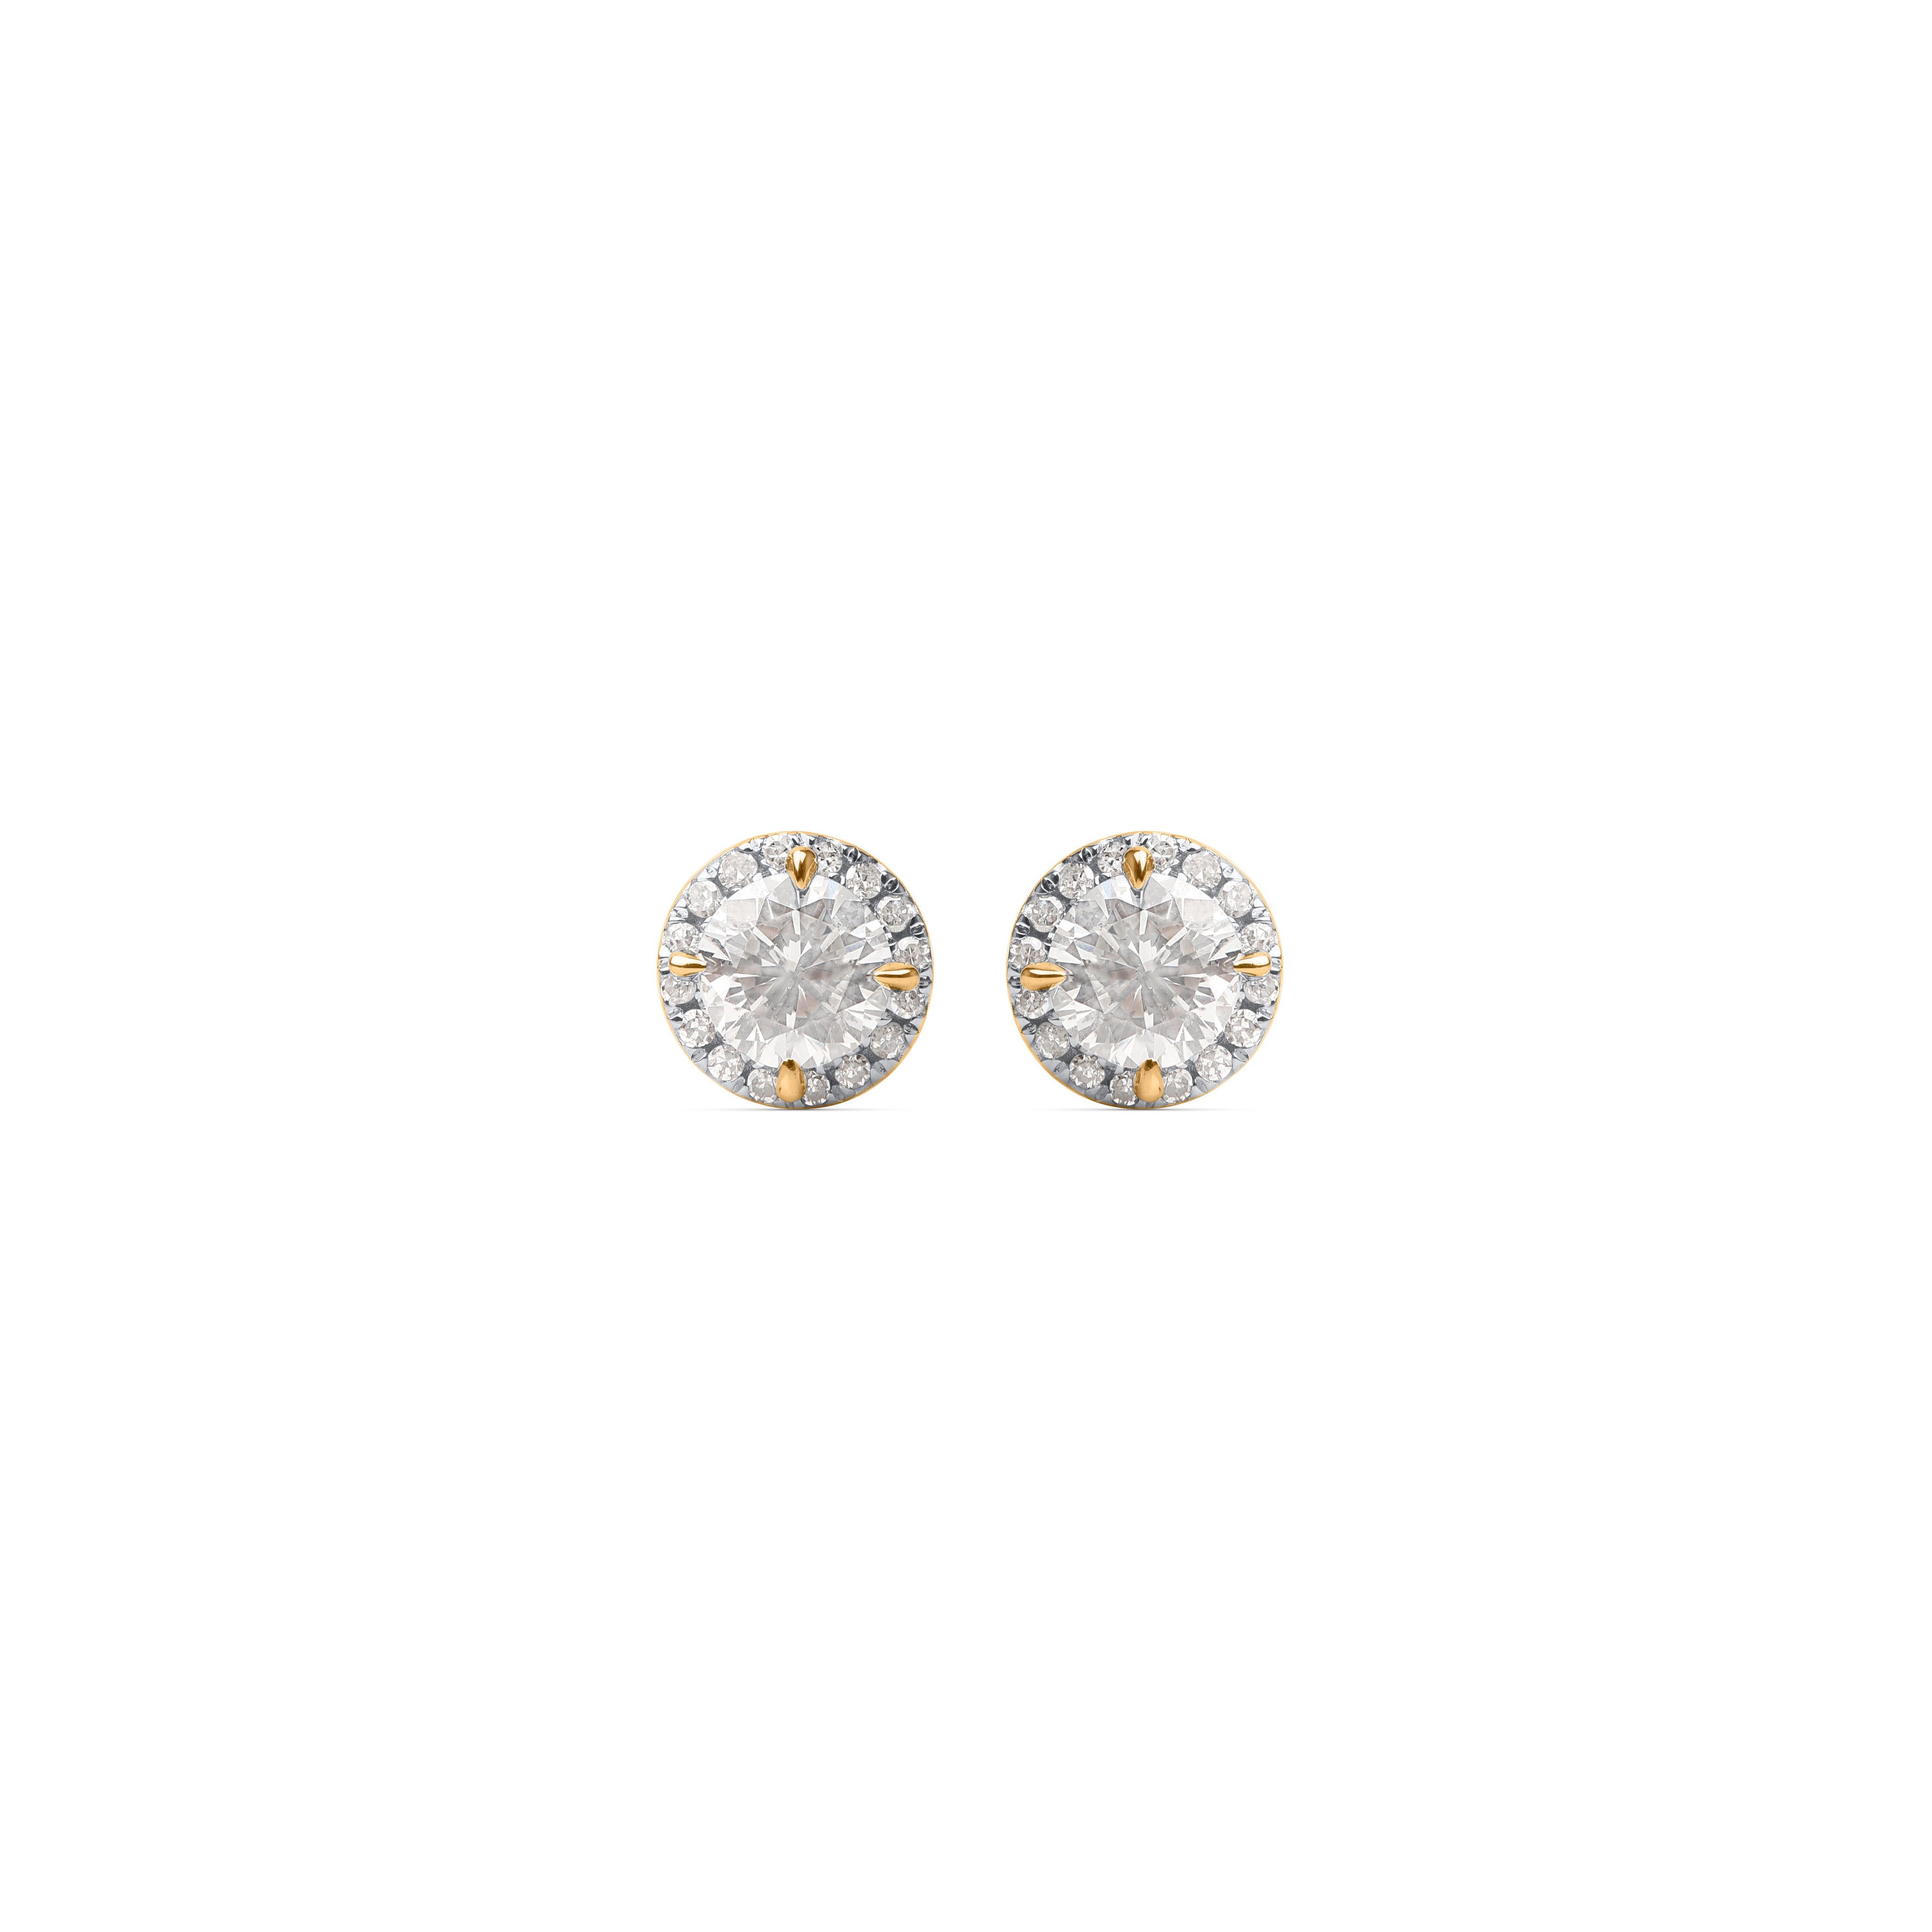 These stud earrings feature 36 natural brilliant cut diamond set in prong setting and are handcrafted by our in-house experts, crafted in 10-karat yellow gold. These diamond stud earrings look classic and elegant. The diamonds are graded H-I Color,